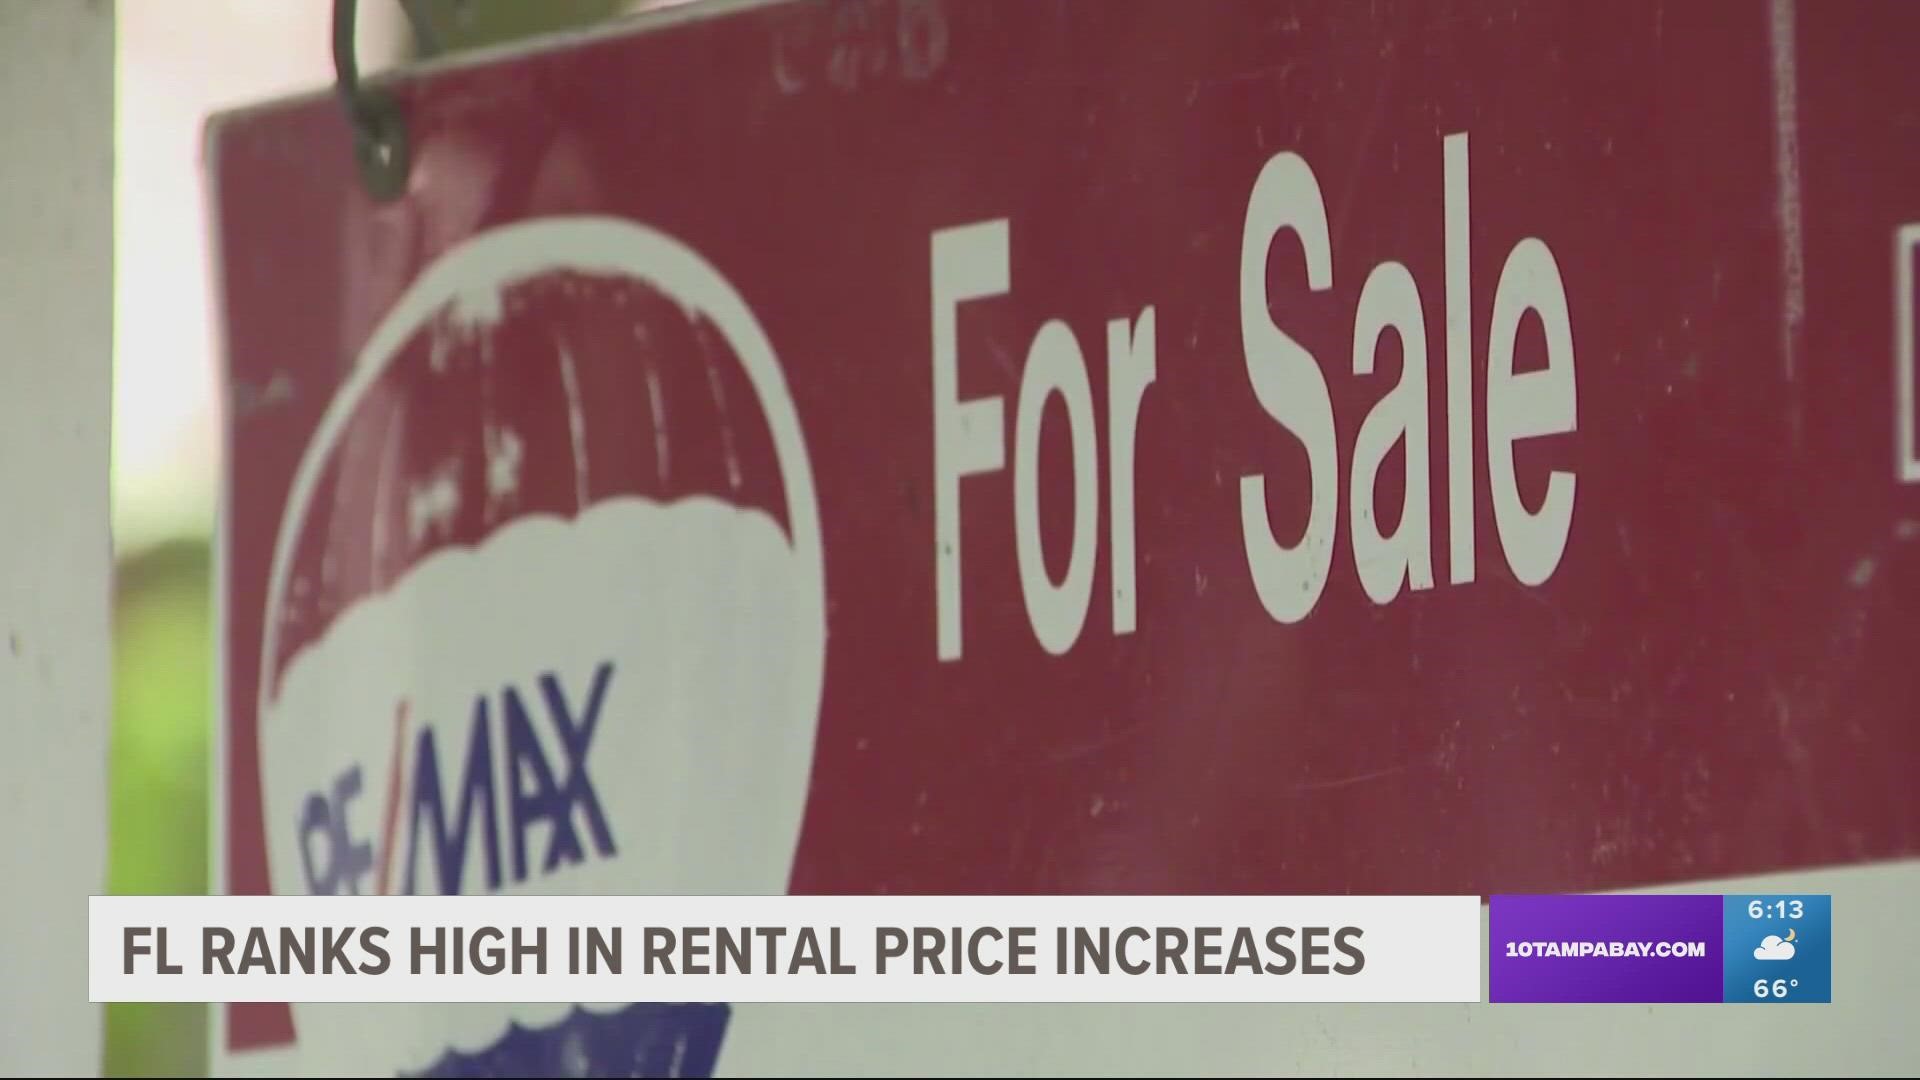 The Florida Atlantic University finds that Florida has nine of the 21 most overpriced rental markets in the U.S., and that includes the Tampa Bay region.